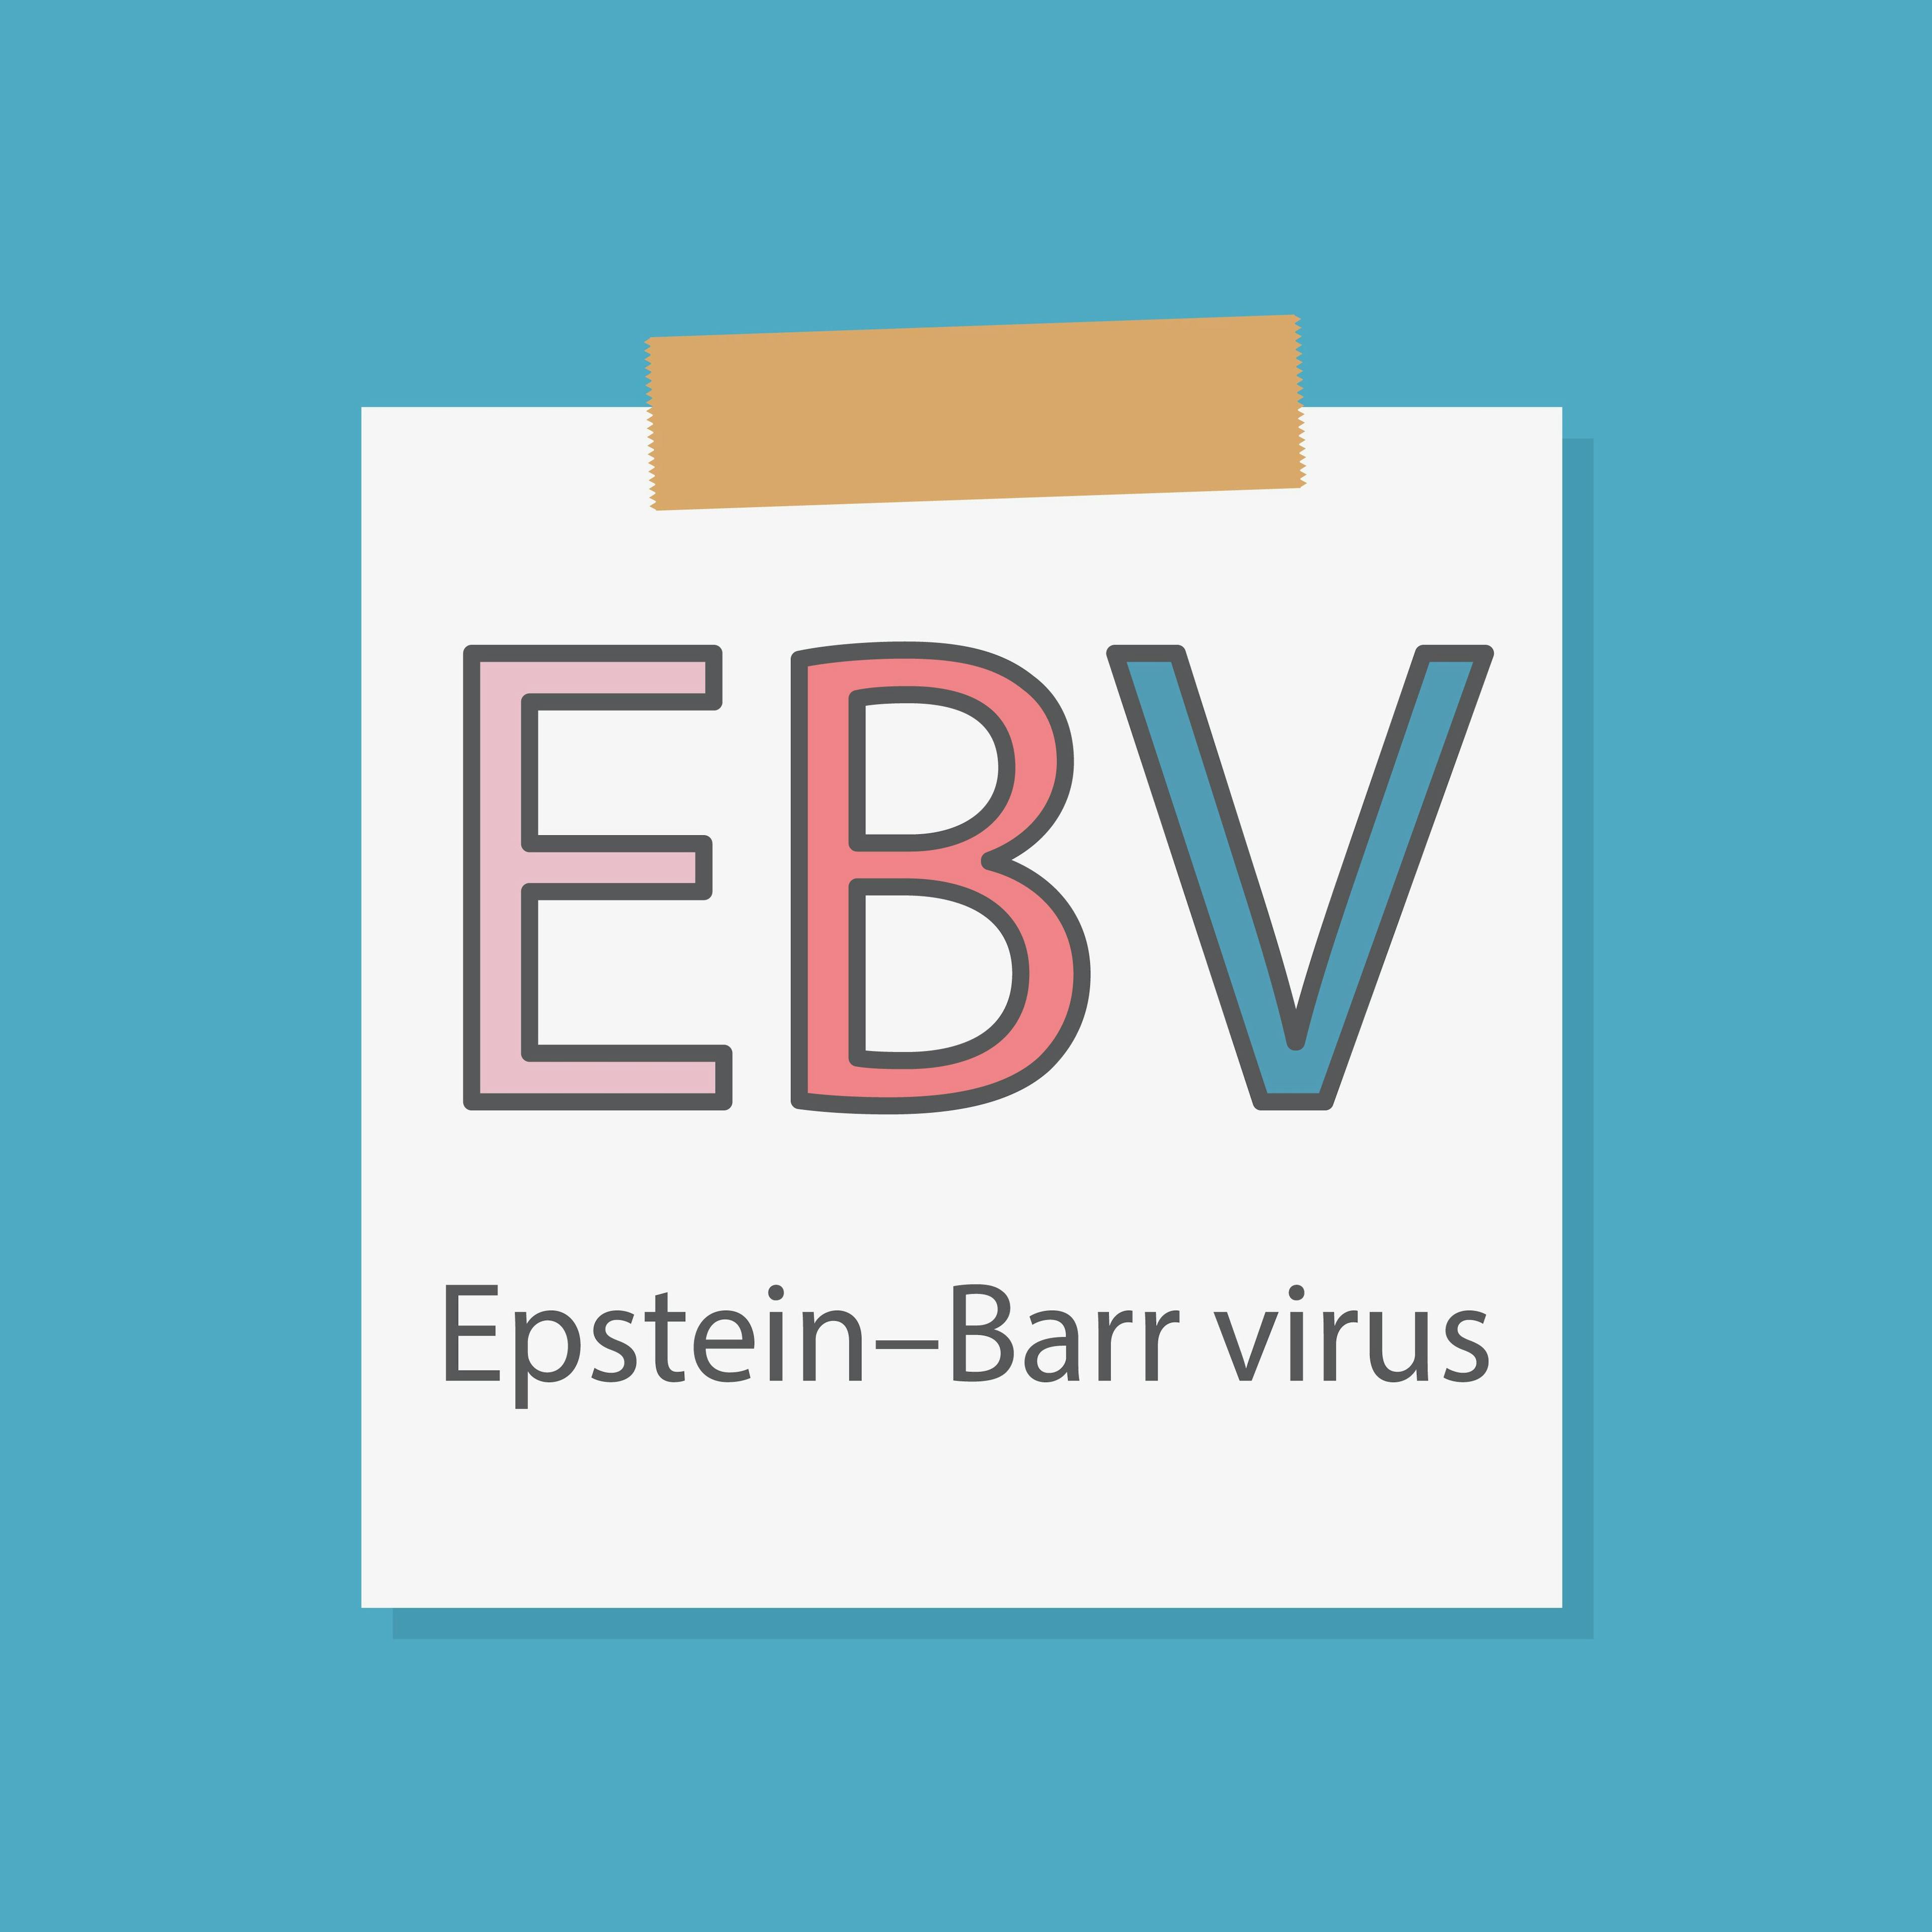 Harvard Researchers Identify Epstein-Barr Virus as a Cause of MS